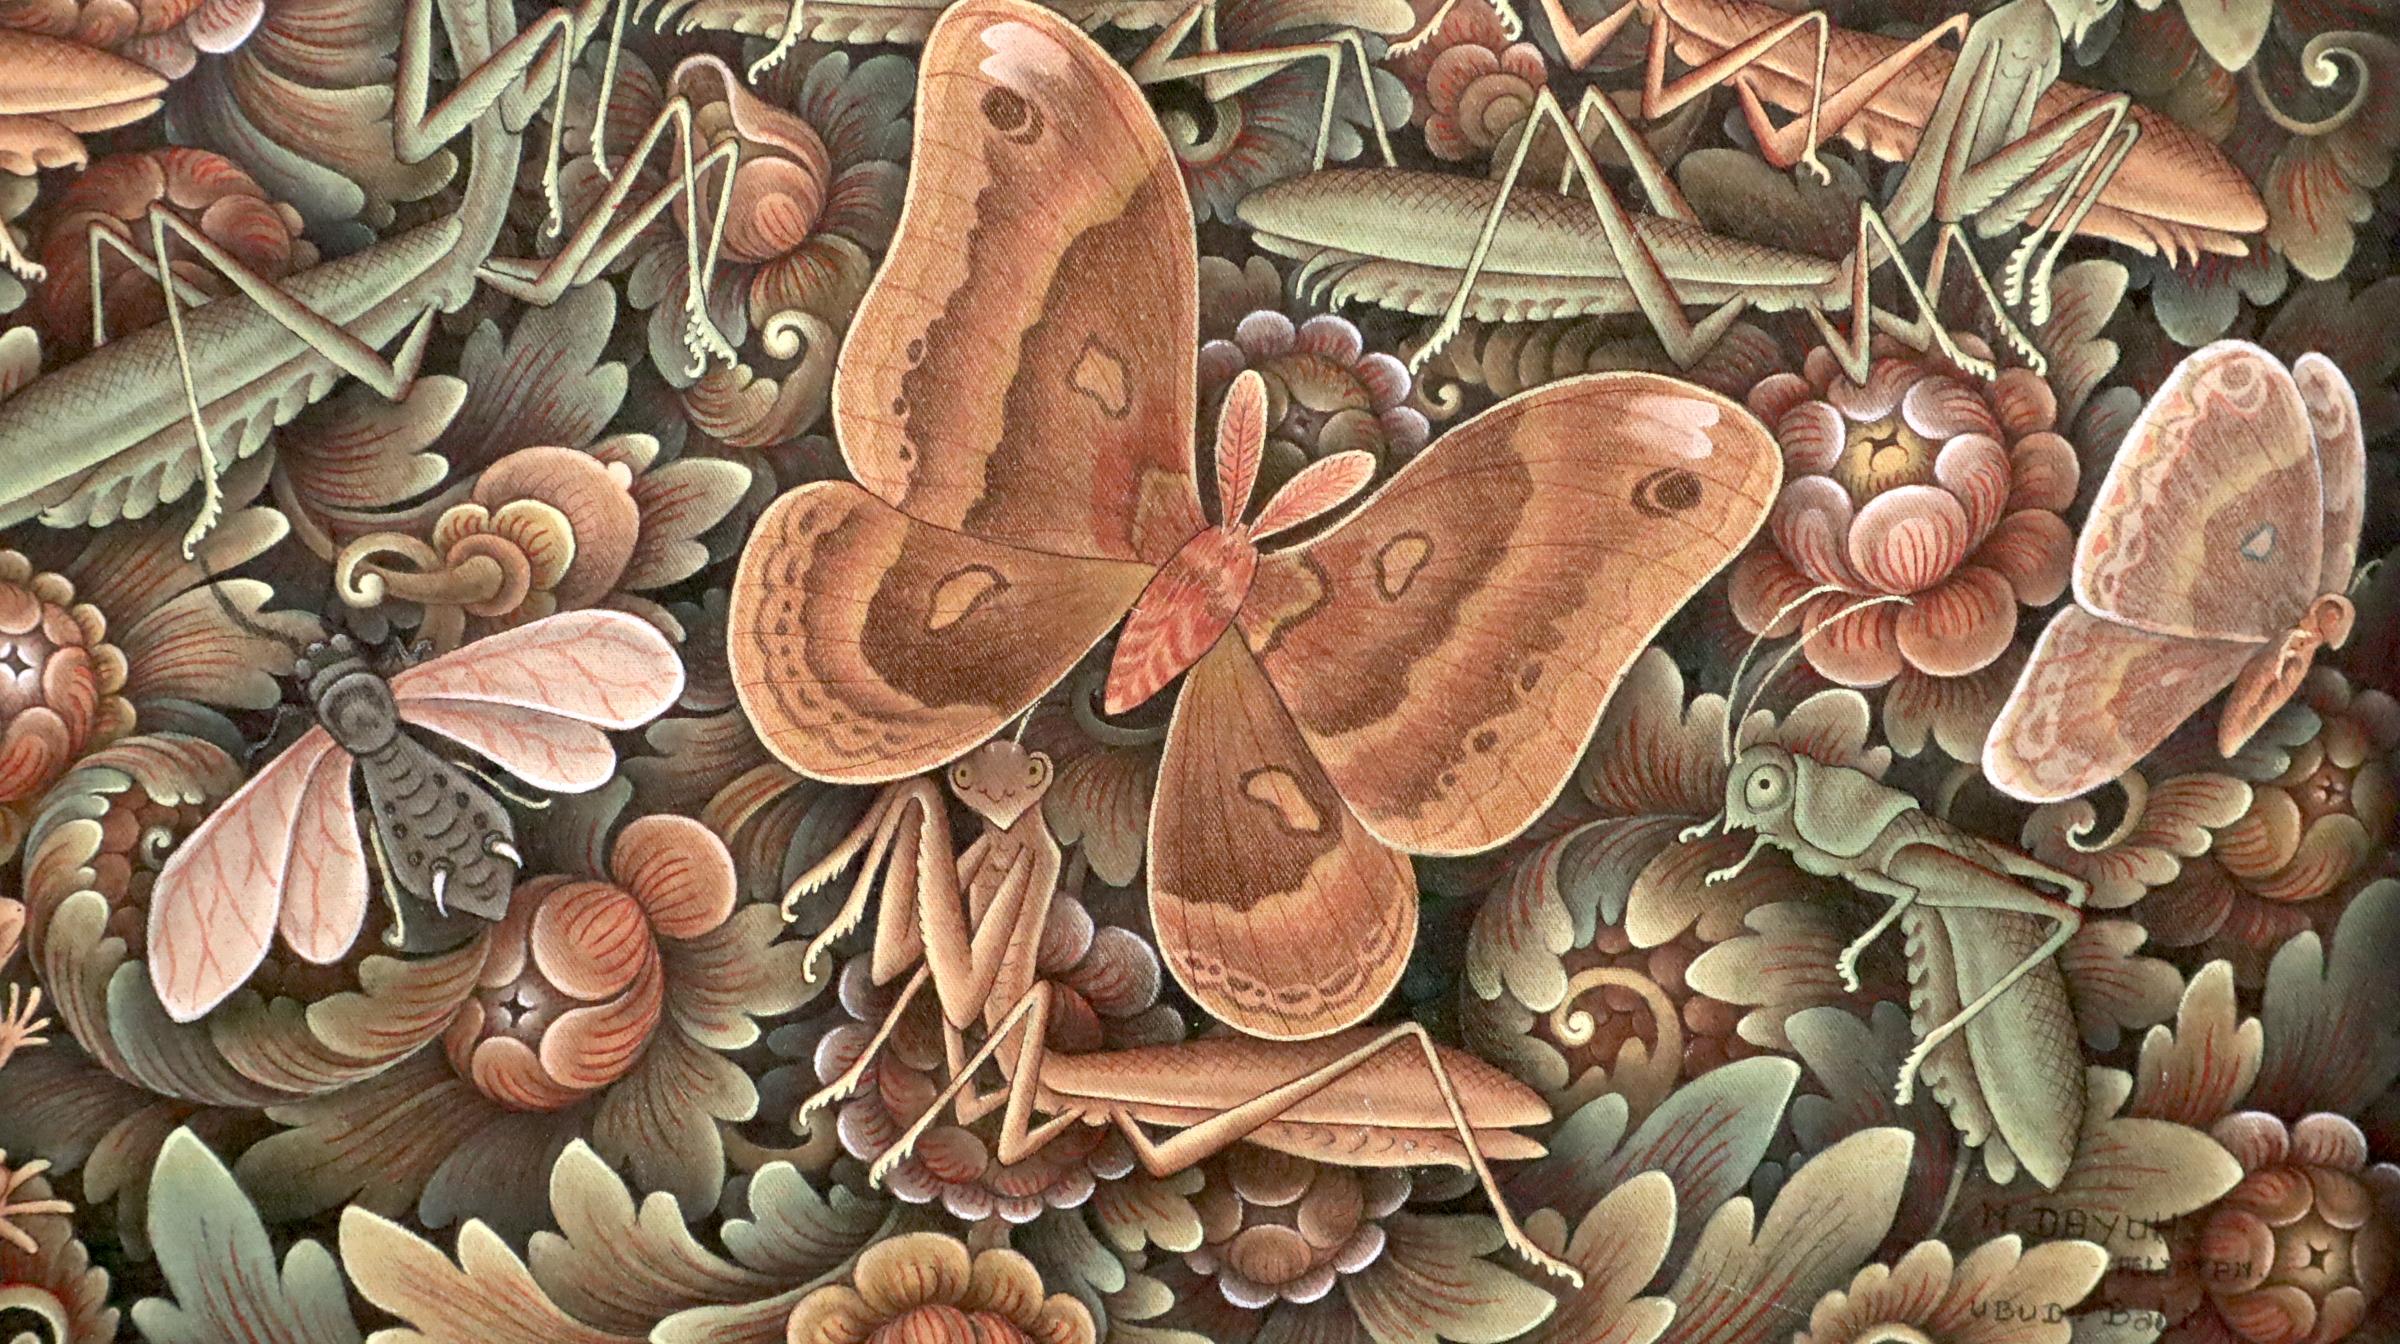 Balinese painting of the insect world Indonesian art from Peliatan Ubud Bali - Painting by Nyoman Dayuh